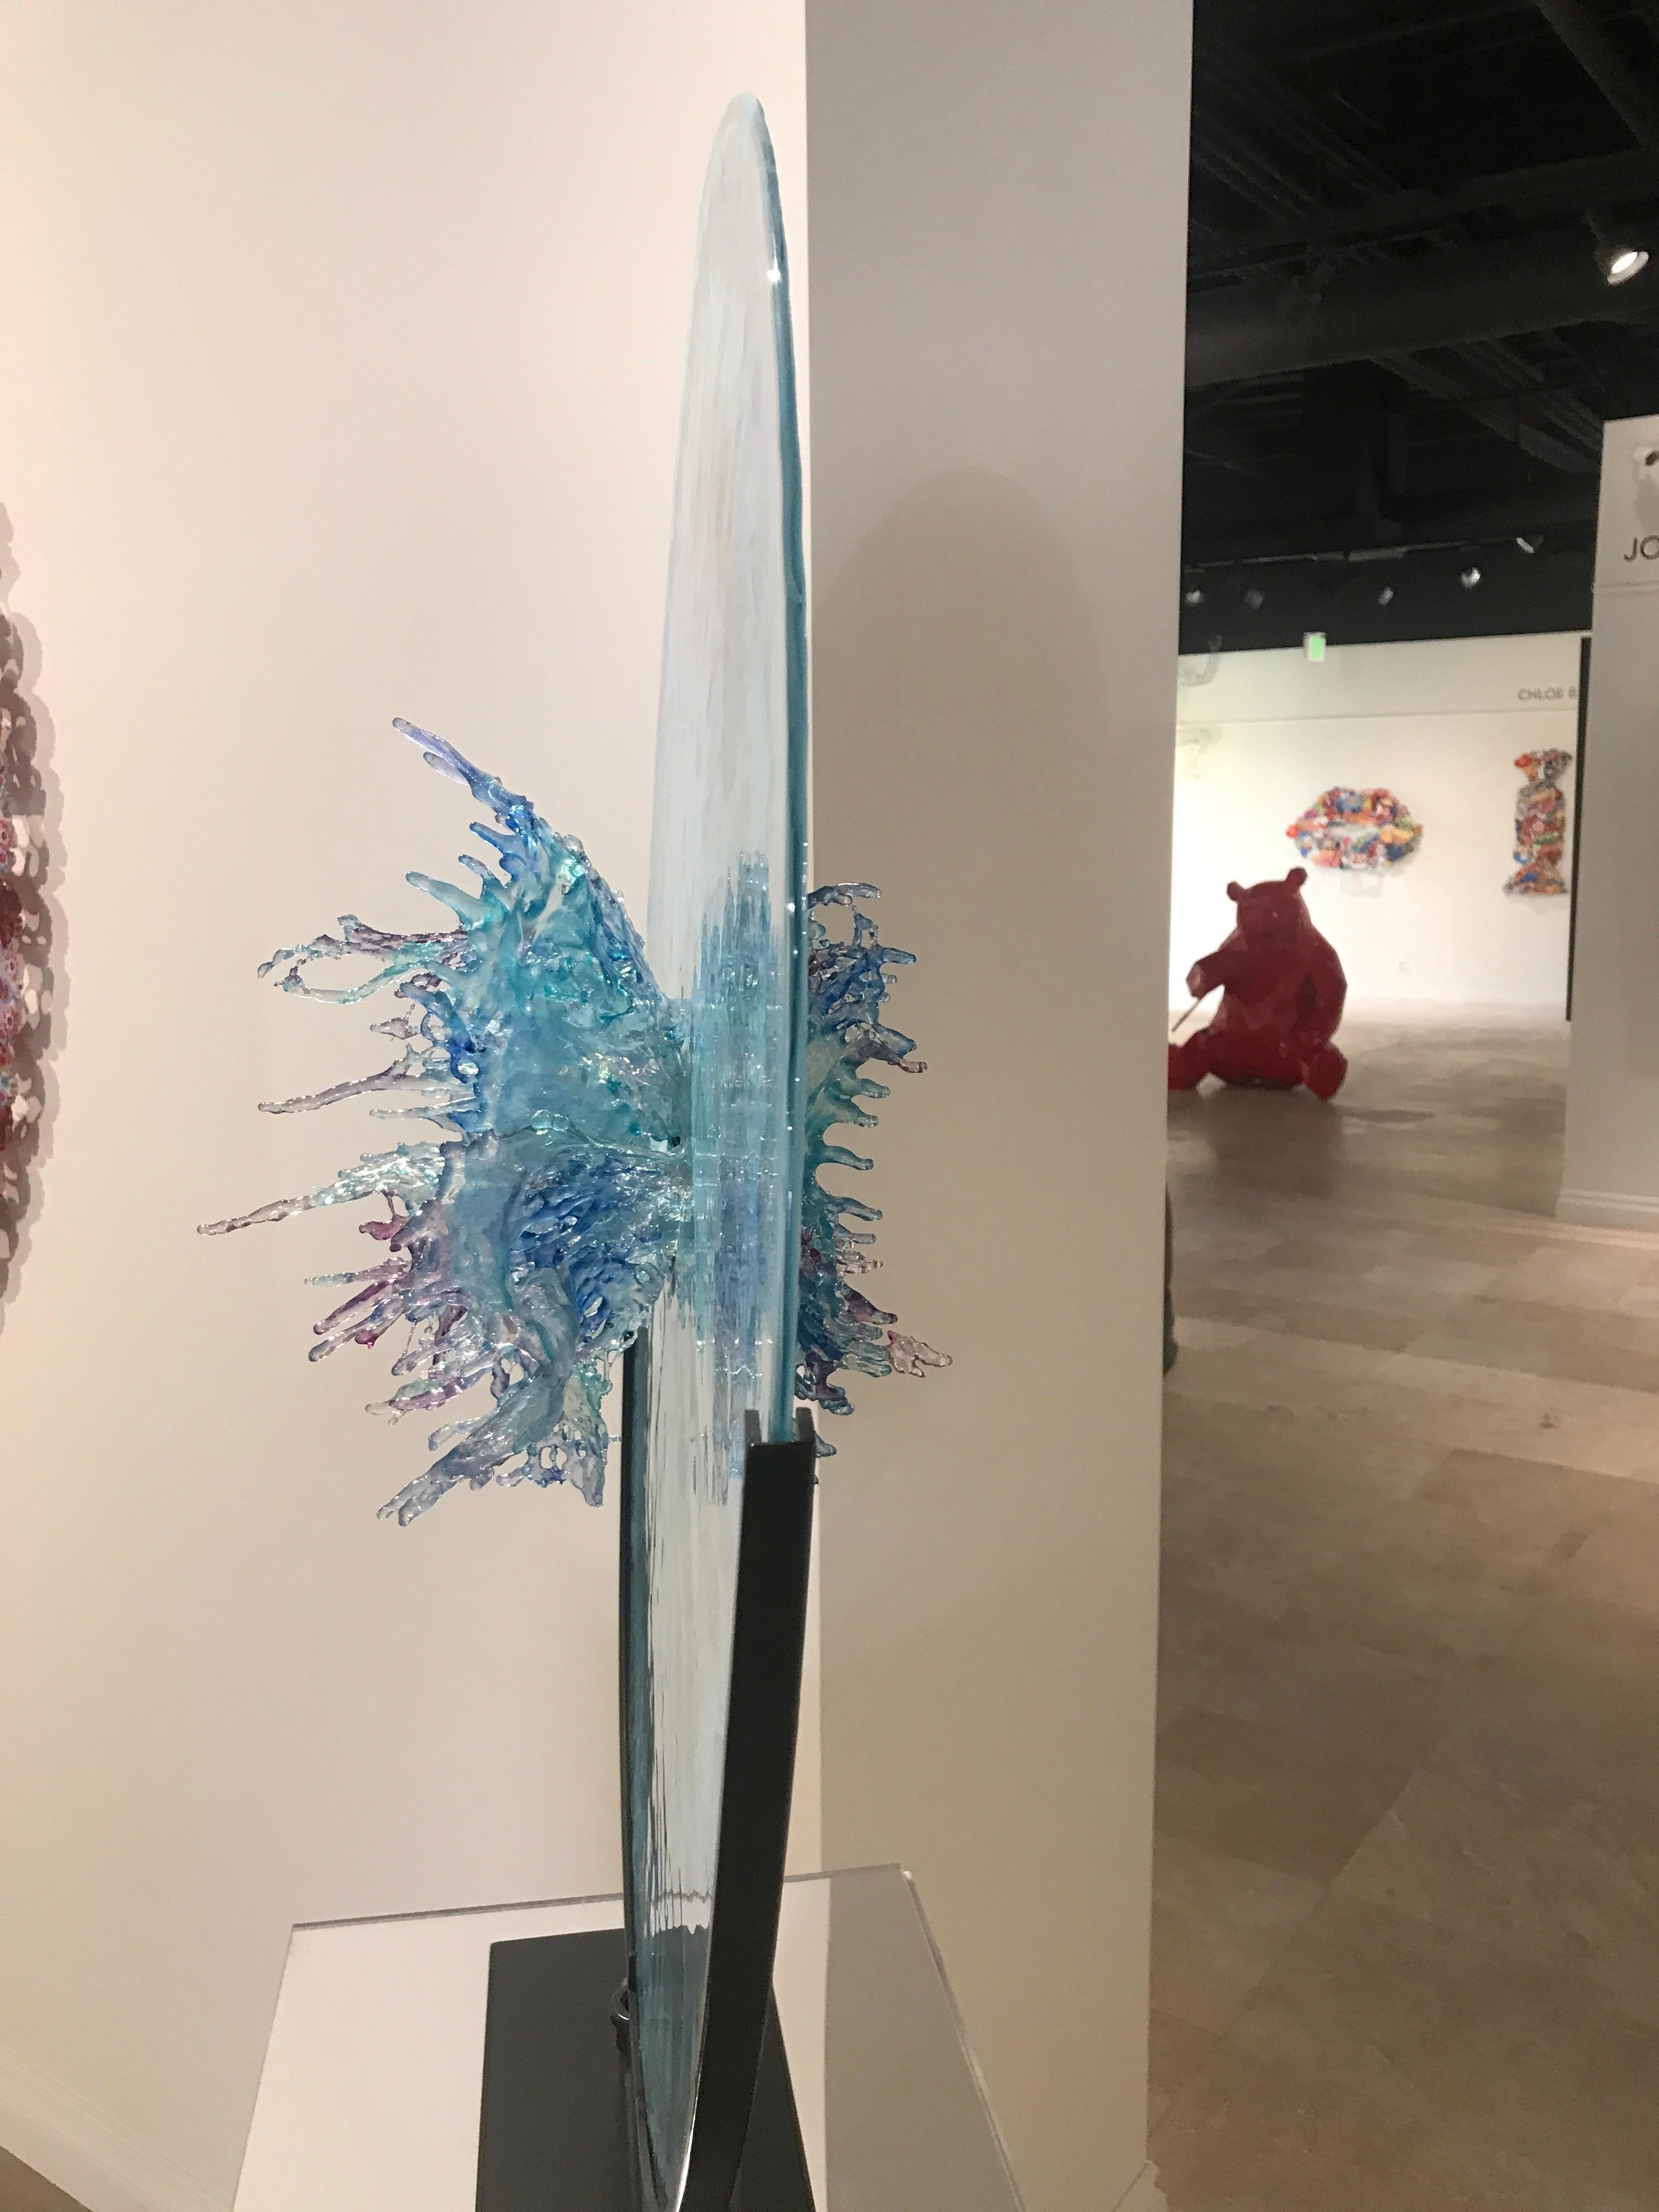 One-of-a-kind, unique artwork
Medium: Murano crystal with matte turquoise resin inlays (on both sides), ink, iron base

About the artist:
Italian artist Annalu's dreamy sculptures enchant onlookers by her incorporation of hyper-realistic splashes of